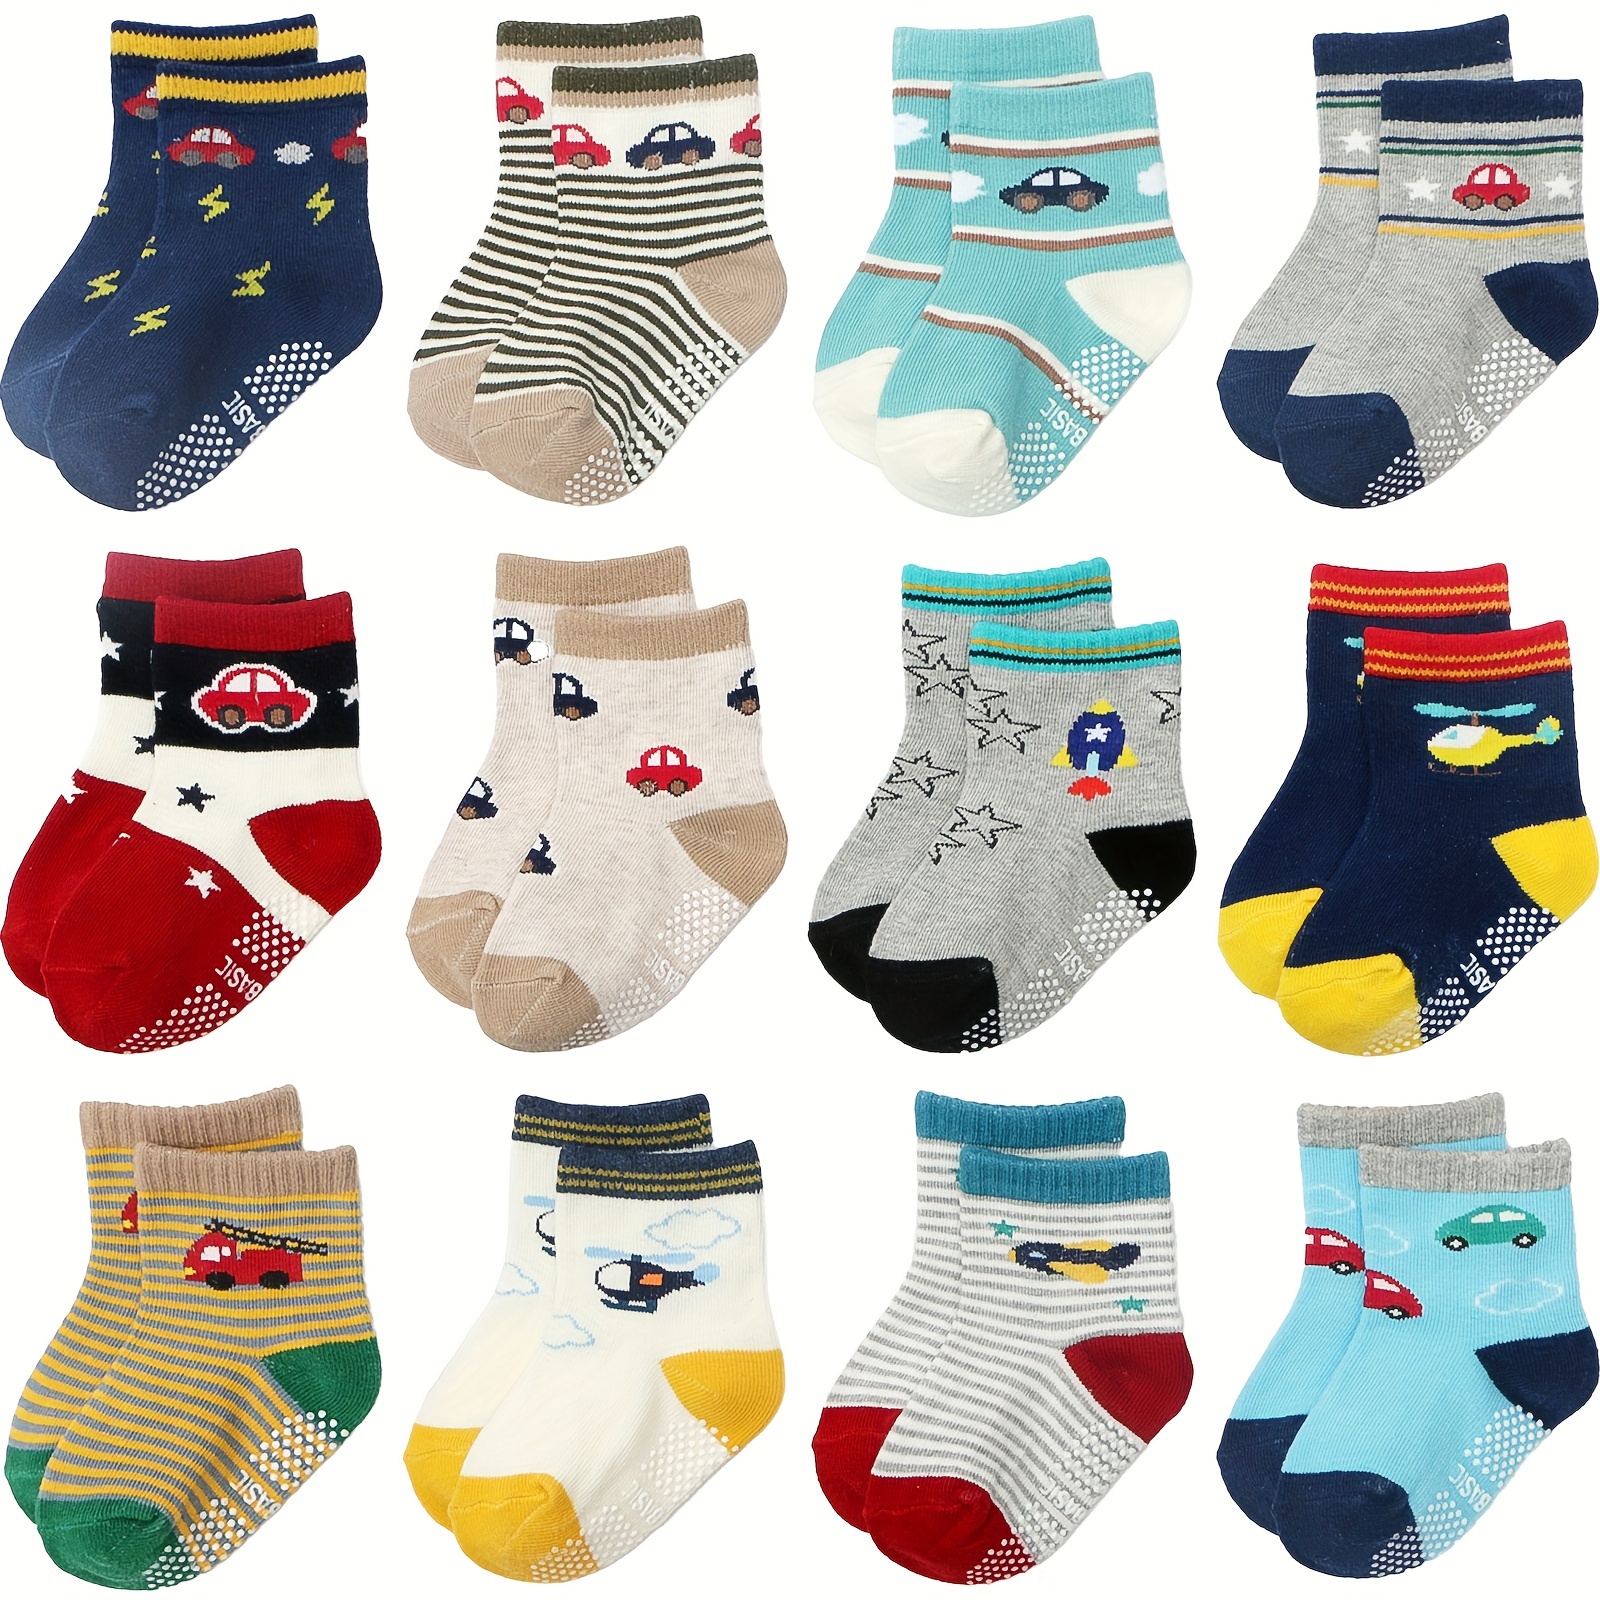 (Assorted)Toddler Socks with Grippers - Non Slip Baby Socks 6-12